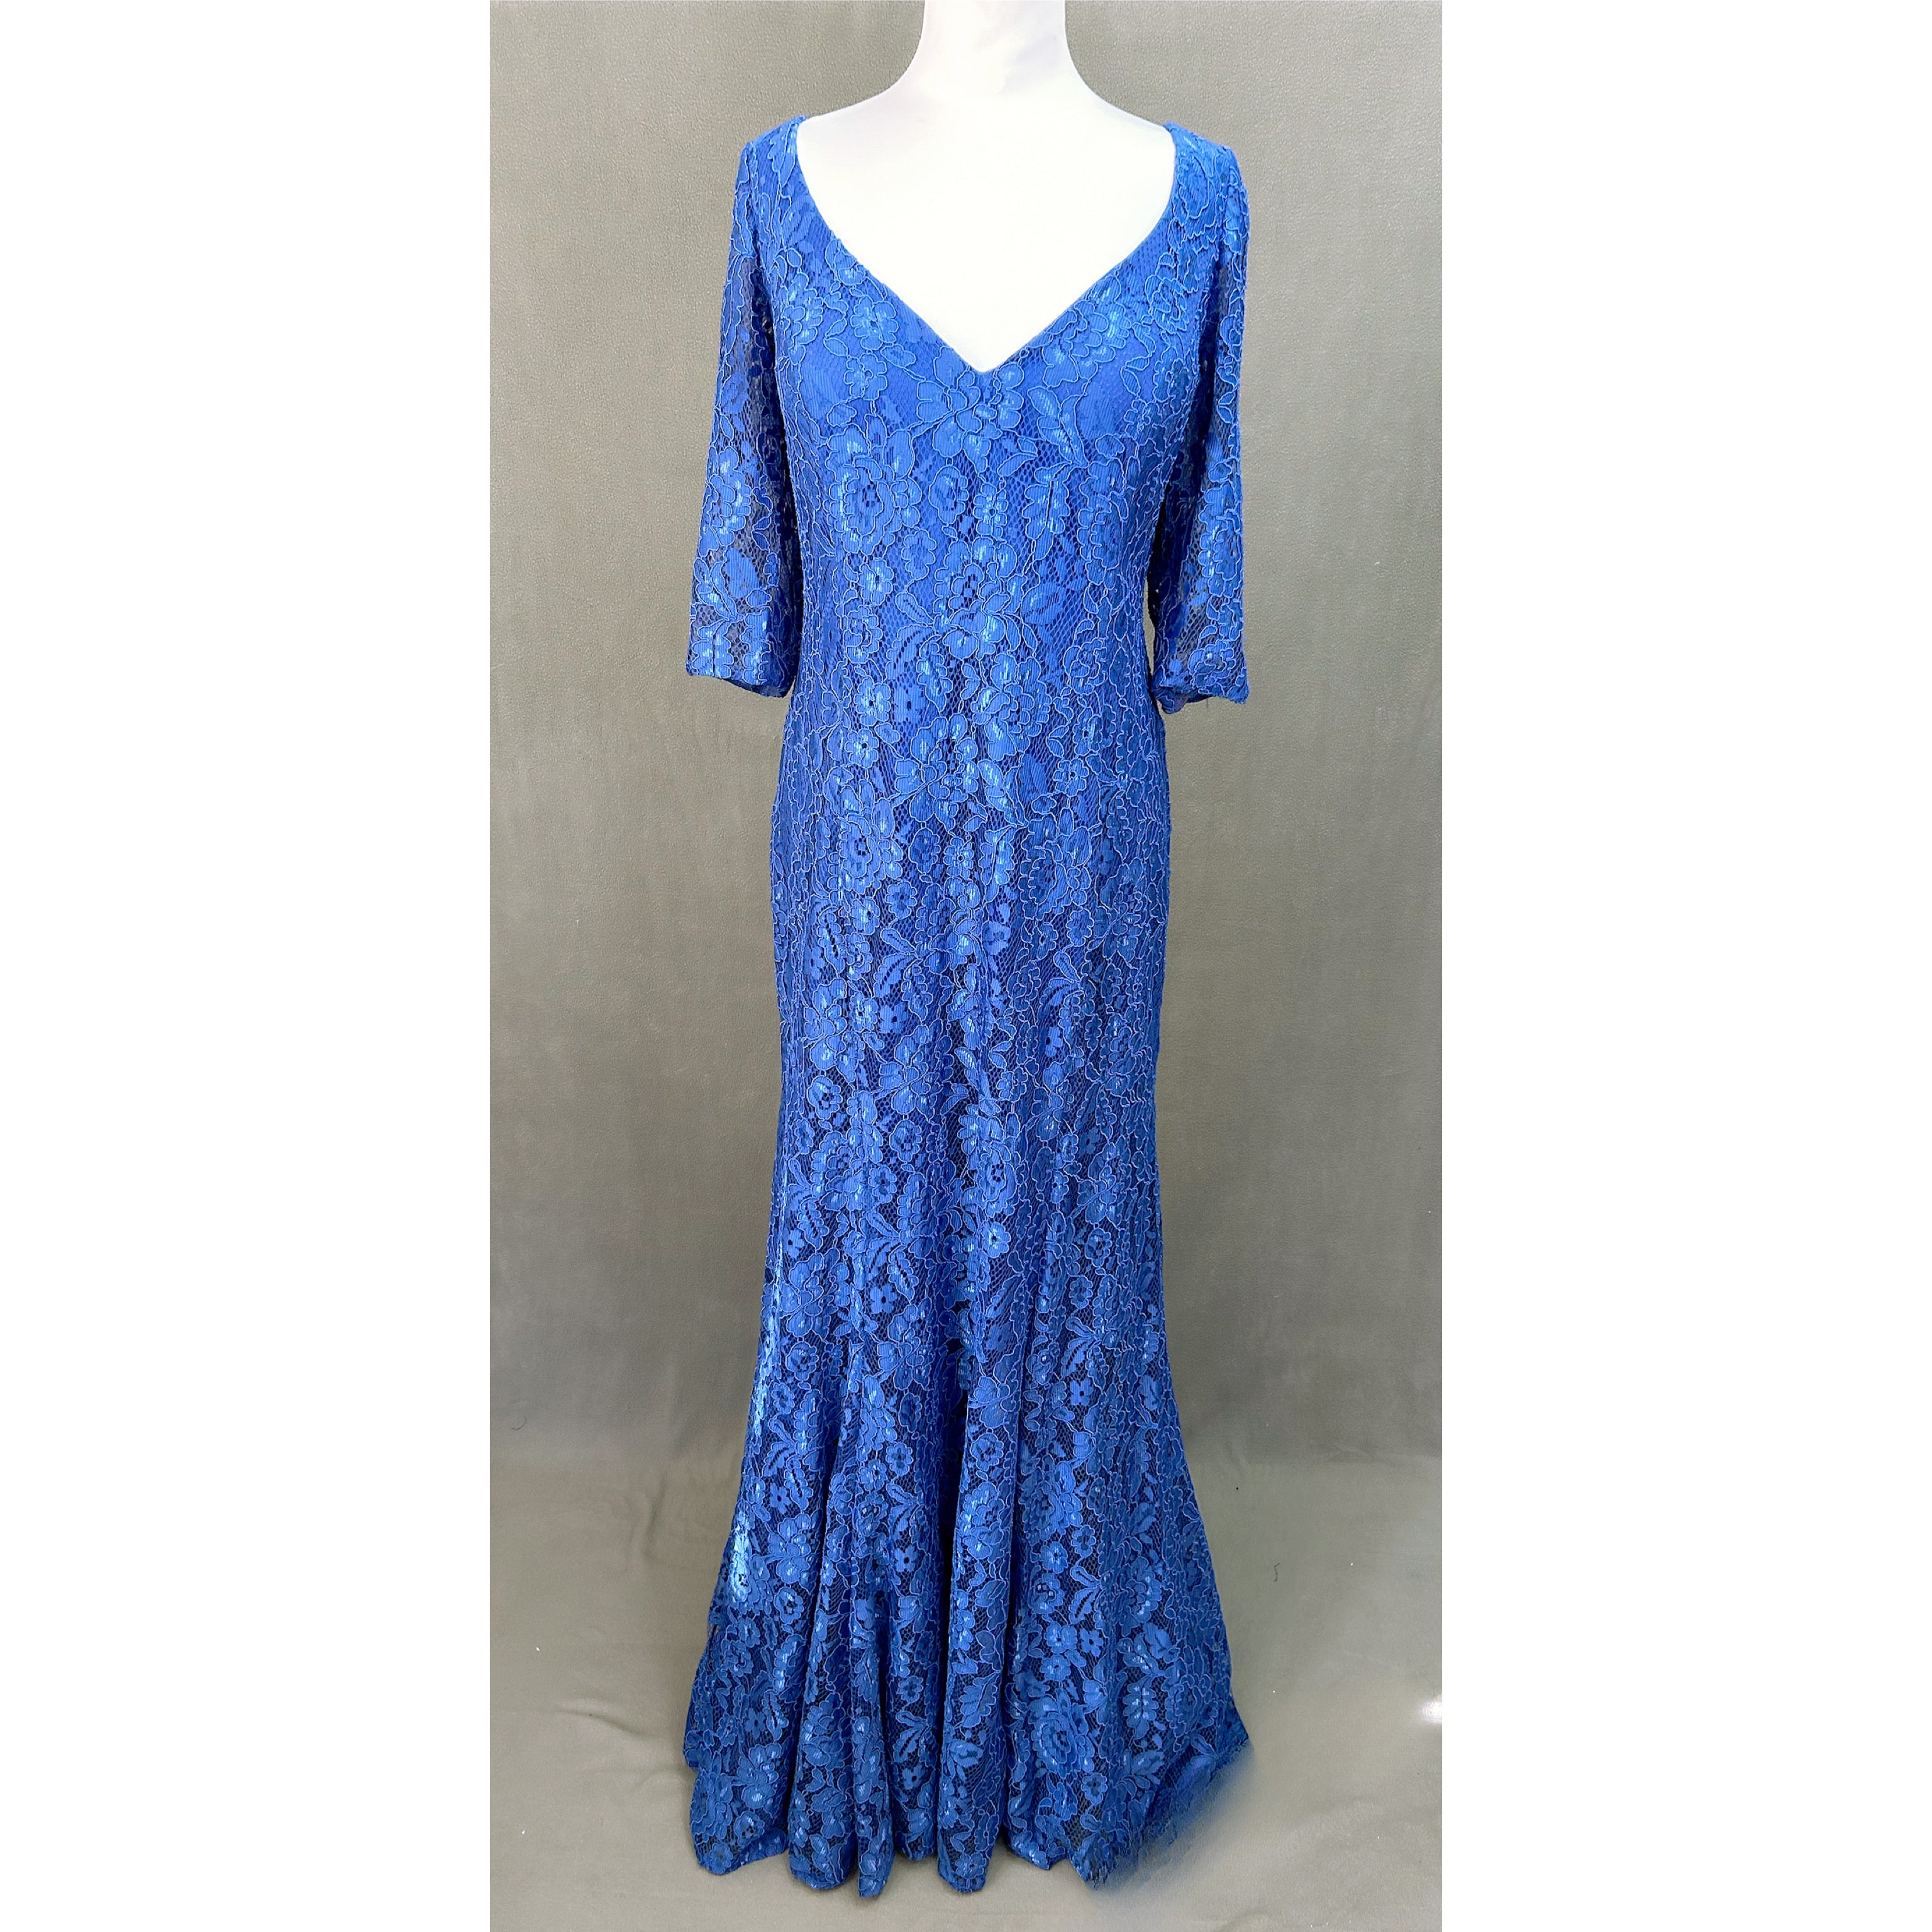 Cameron Blake royal blue dress, size 18, NEW WITH TAGS!